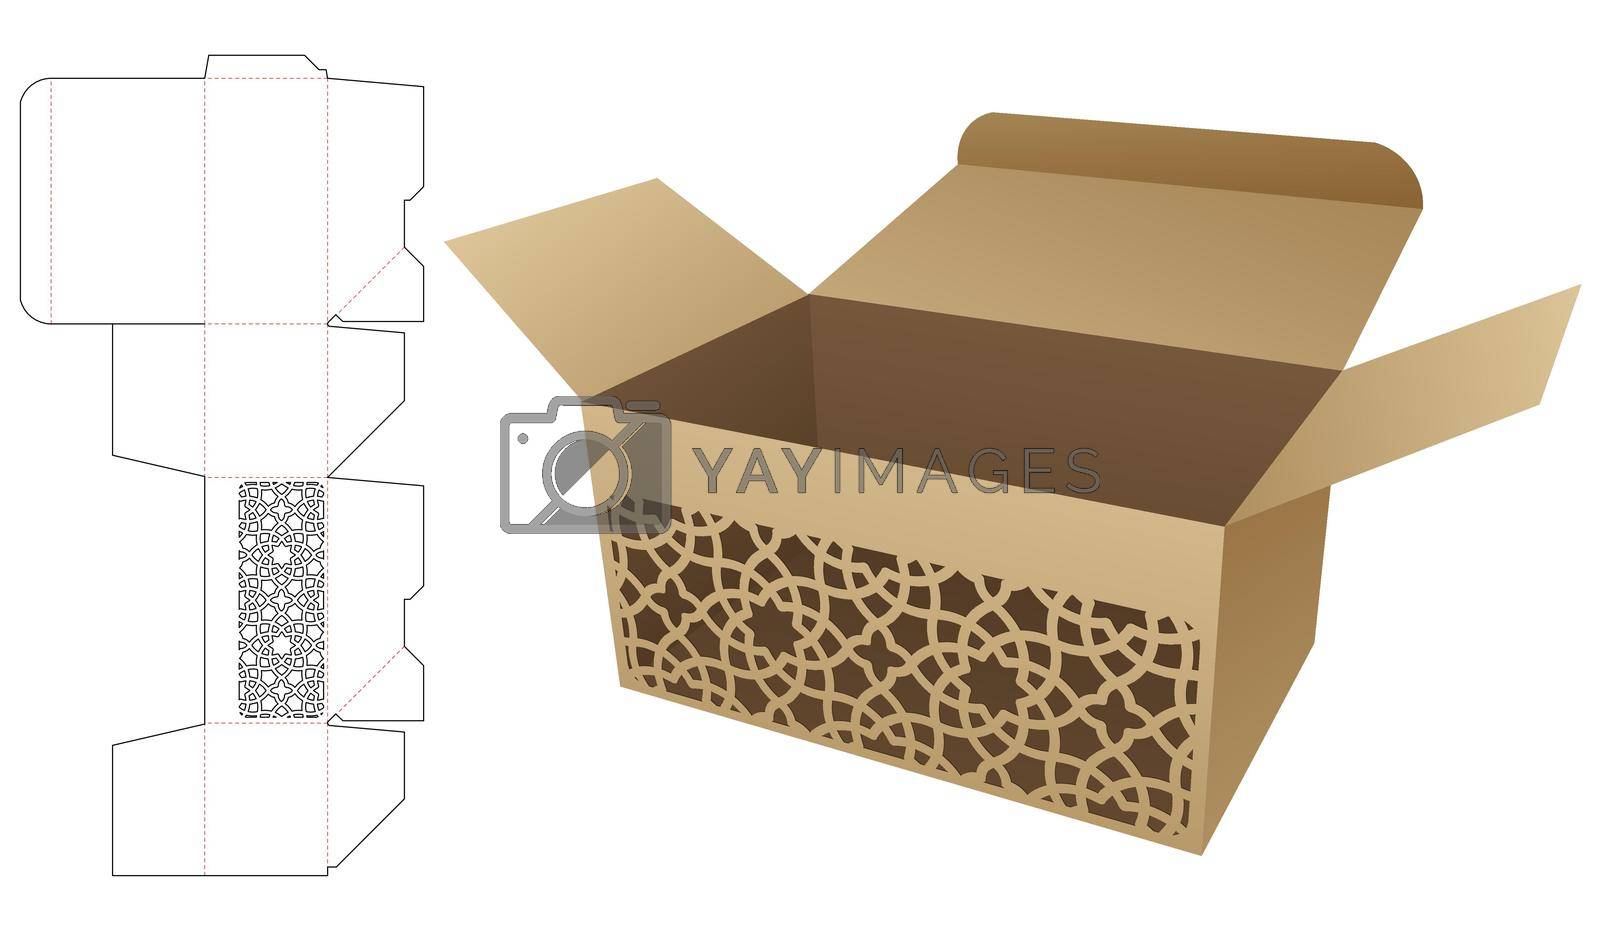 Royalty free image of Packaging box with stenciled Arabic pattern window die cut template and 3D mockup by valueinvestor